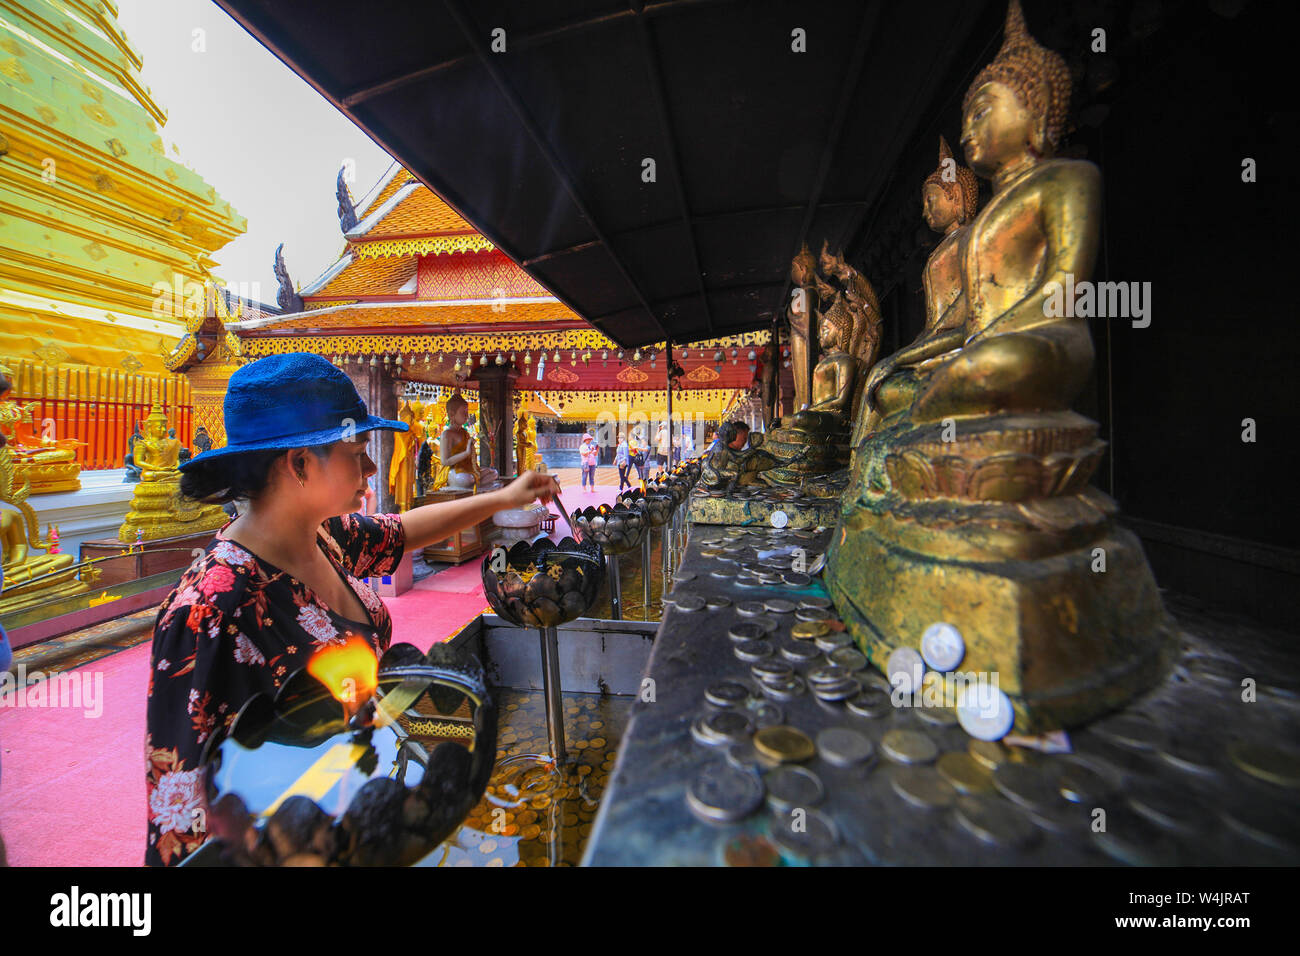 An Asian woman tourist lights votive candles before statues of Buddha at the Wat Phra That Doi Suthep or Doi Suthep for short in Chaing Mai, Thailand. Stock Photo